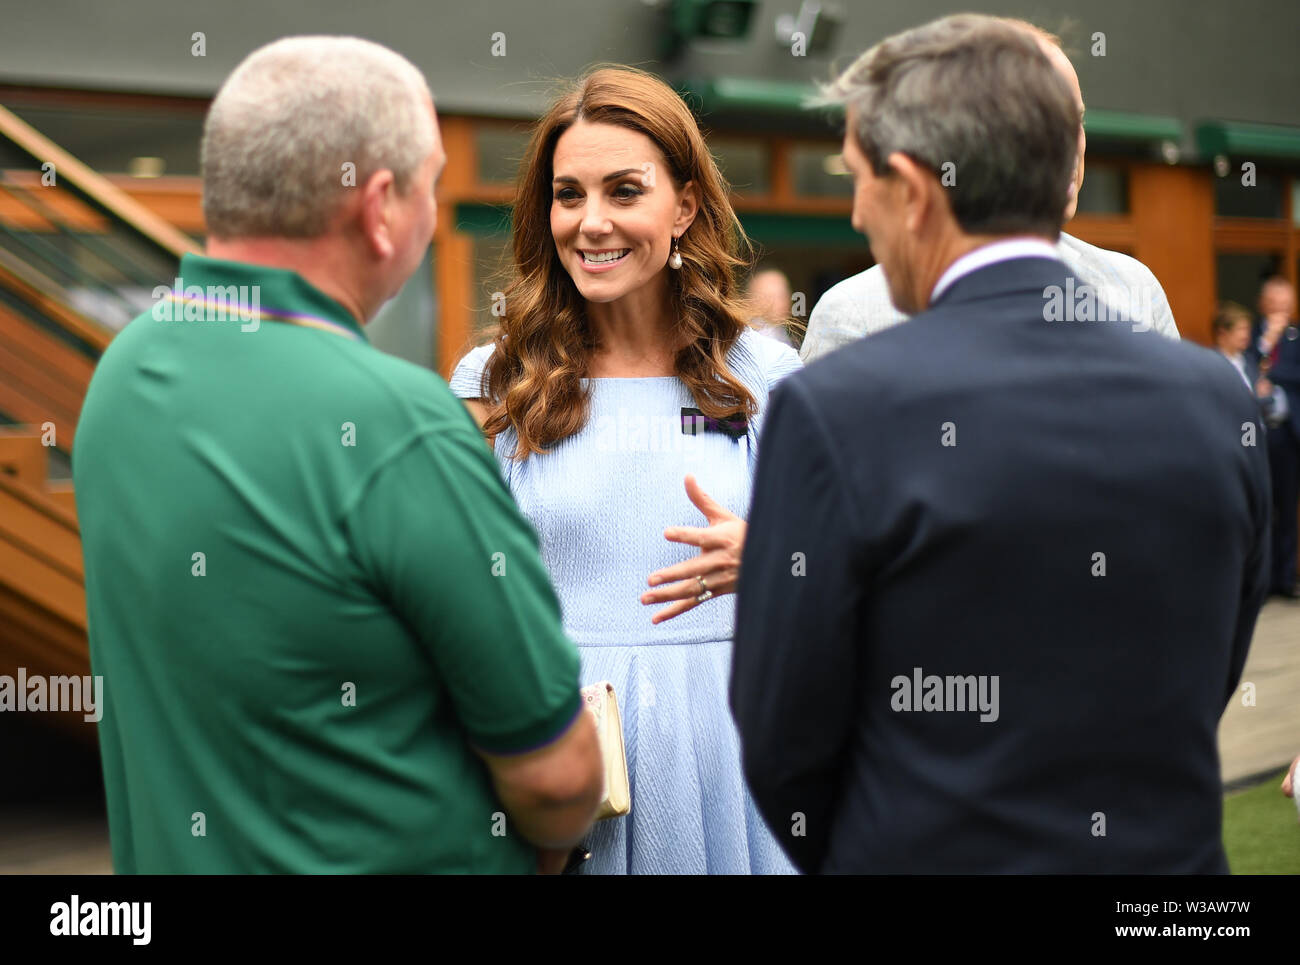 The Duke and Duchess of Cambridge meet (left to right) Mick Woods, from the AELTC facilities management department, and referee Andrew Jarrett and Jayne Miller, ahead of the Men's Singles Final on day thirteen of the Wimbledon Championships at the All England Lawn Tennis and Croquet Club, Wimbledon. Stock Photo